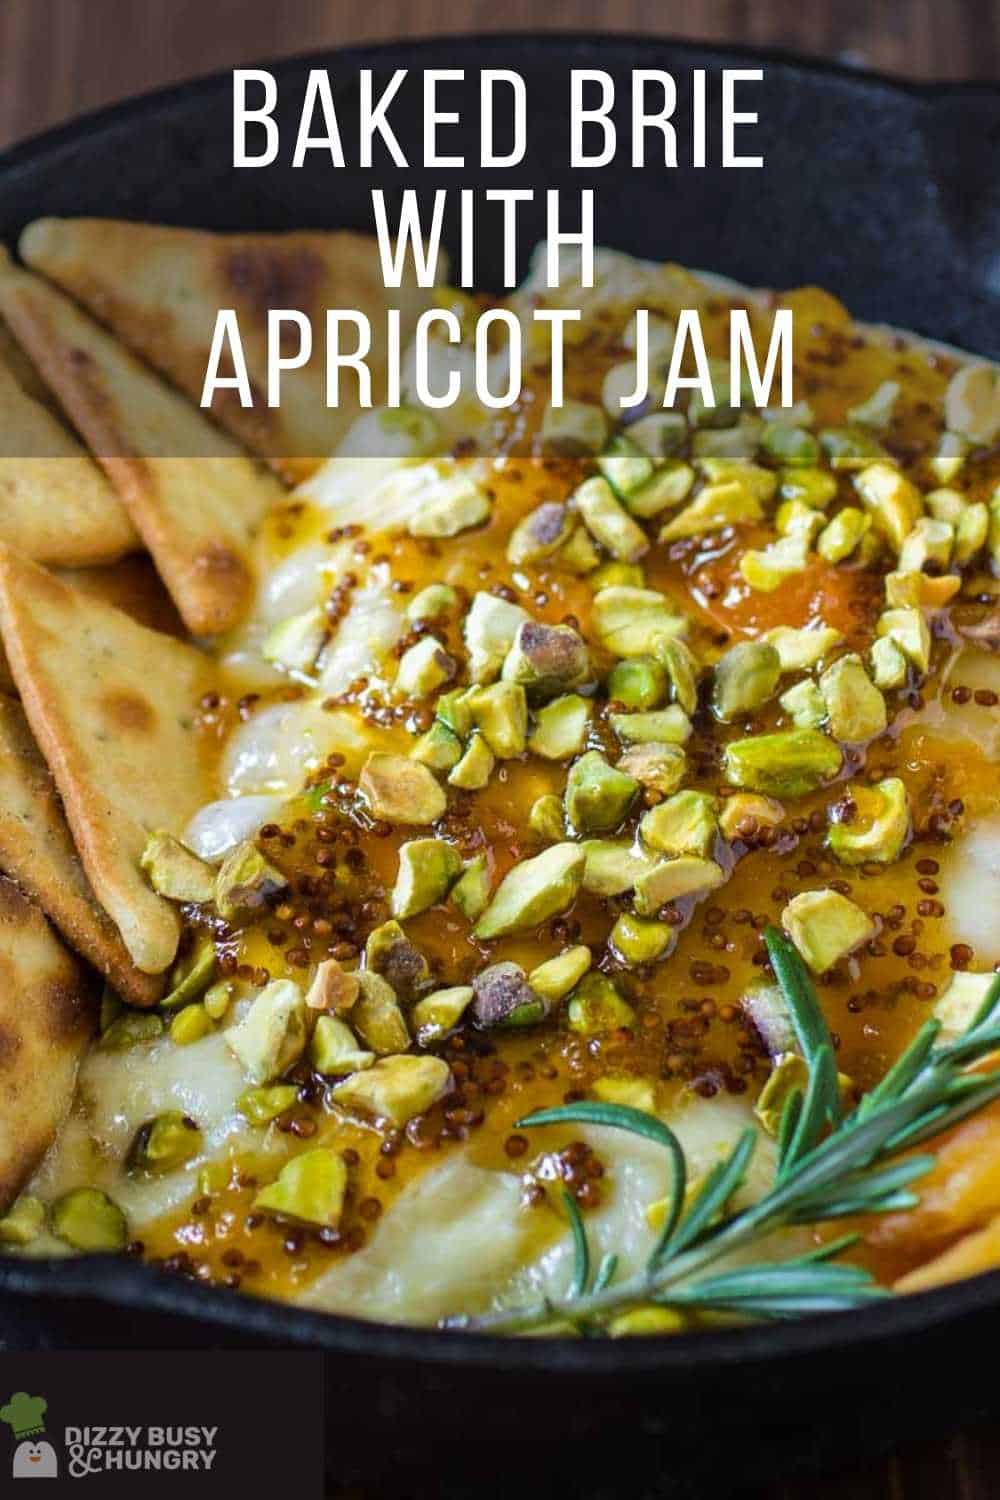 Close up view of baked brie with pita chips, apricots, and herbs in a skillet on a wooden surface.